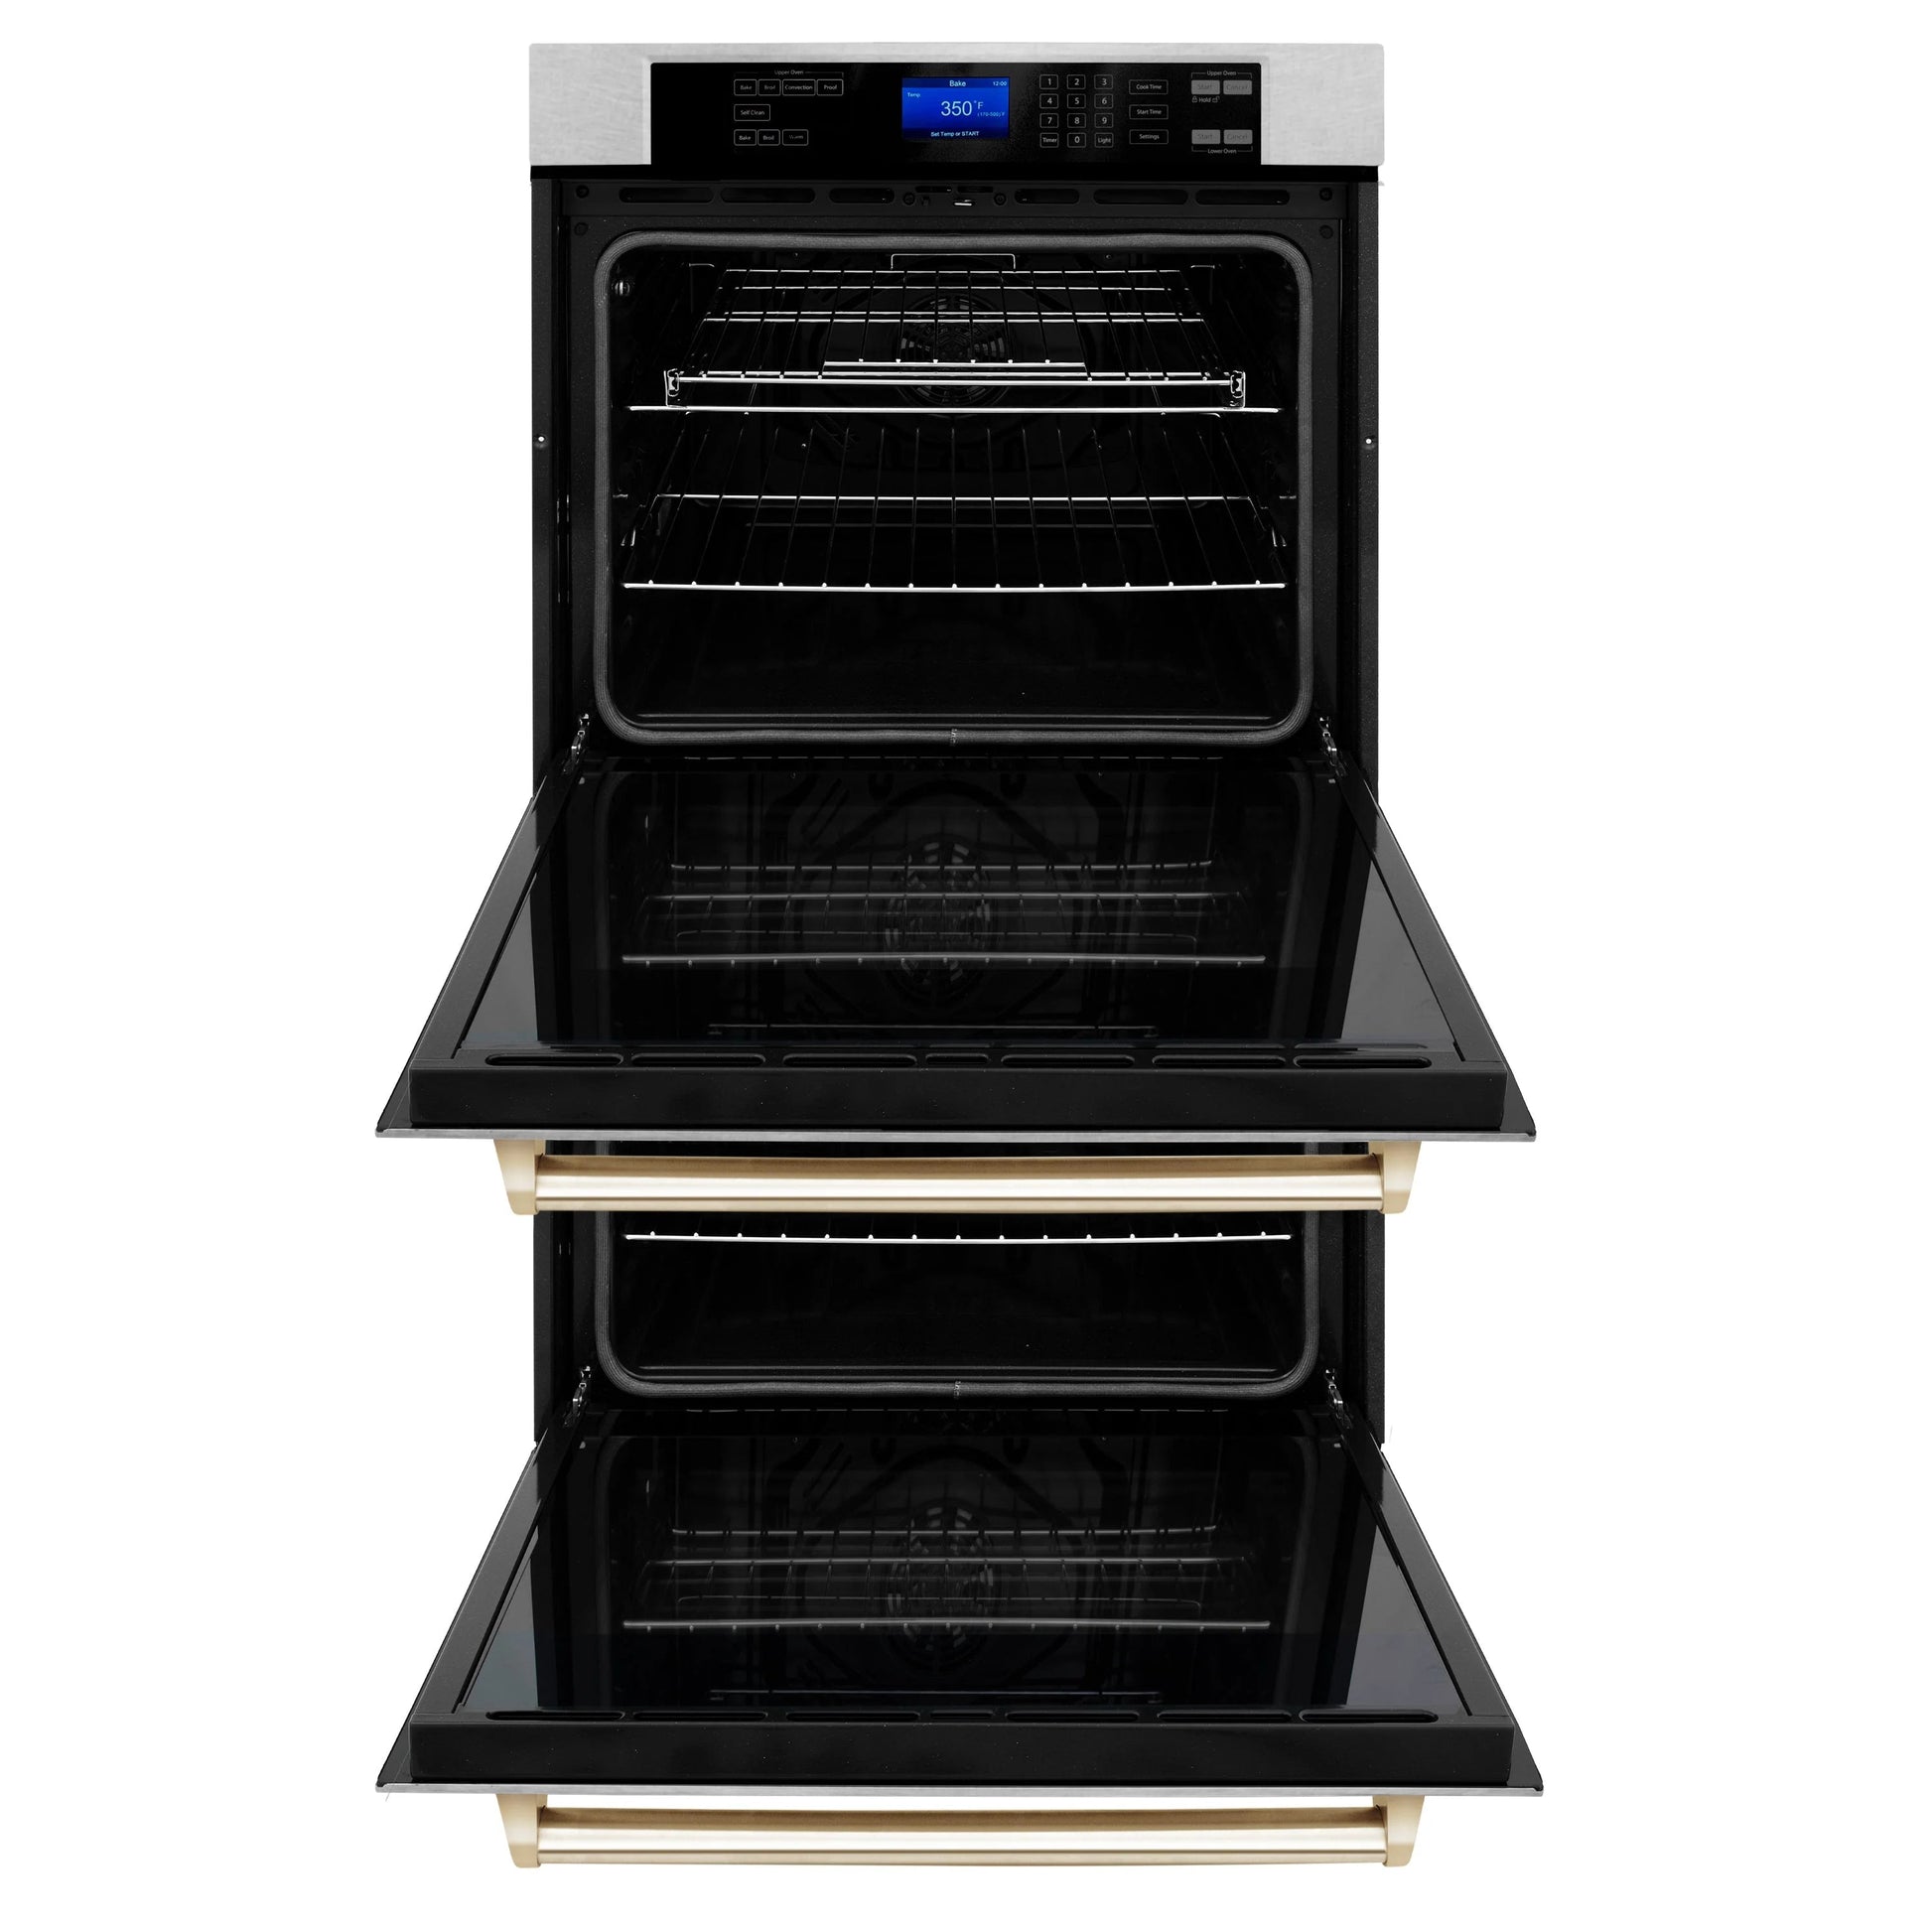 ZLINE Autograph Edition 30" Electric Oven - DuraSnow with Polished Gold Accents